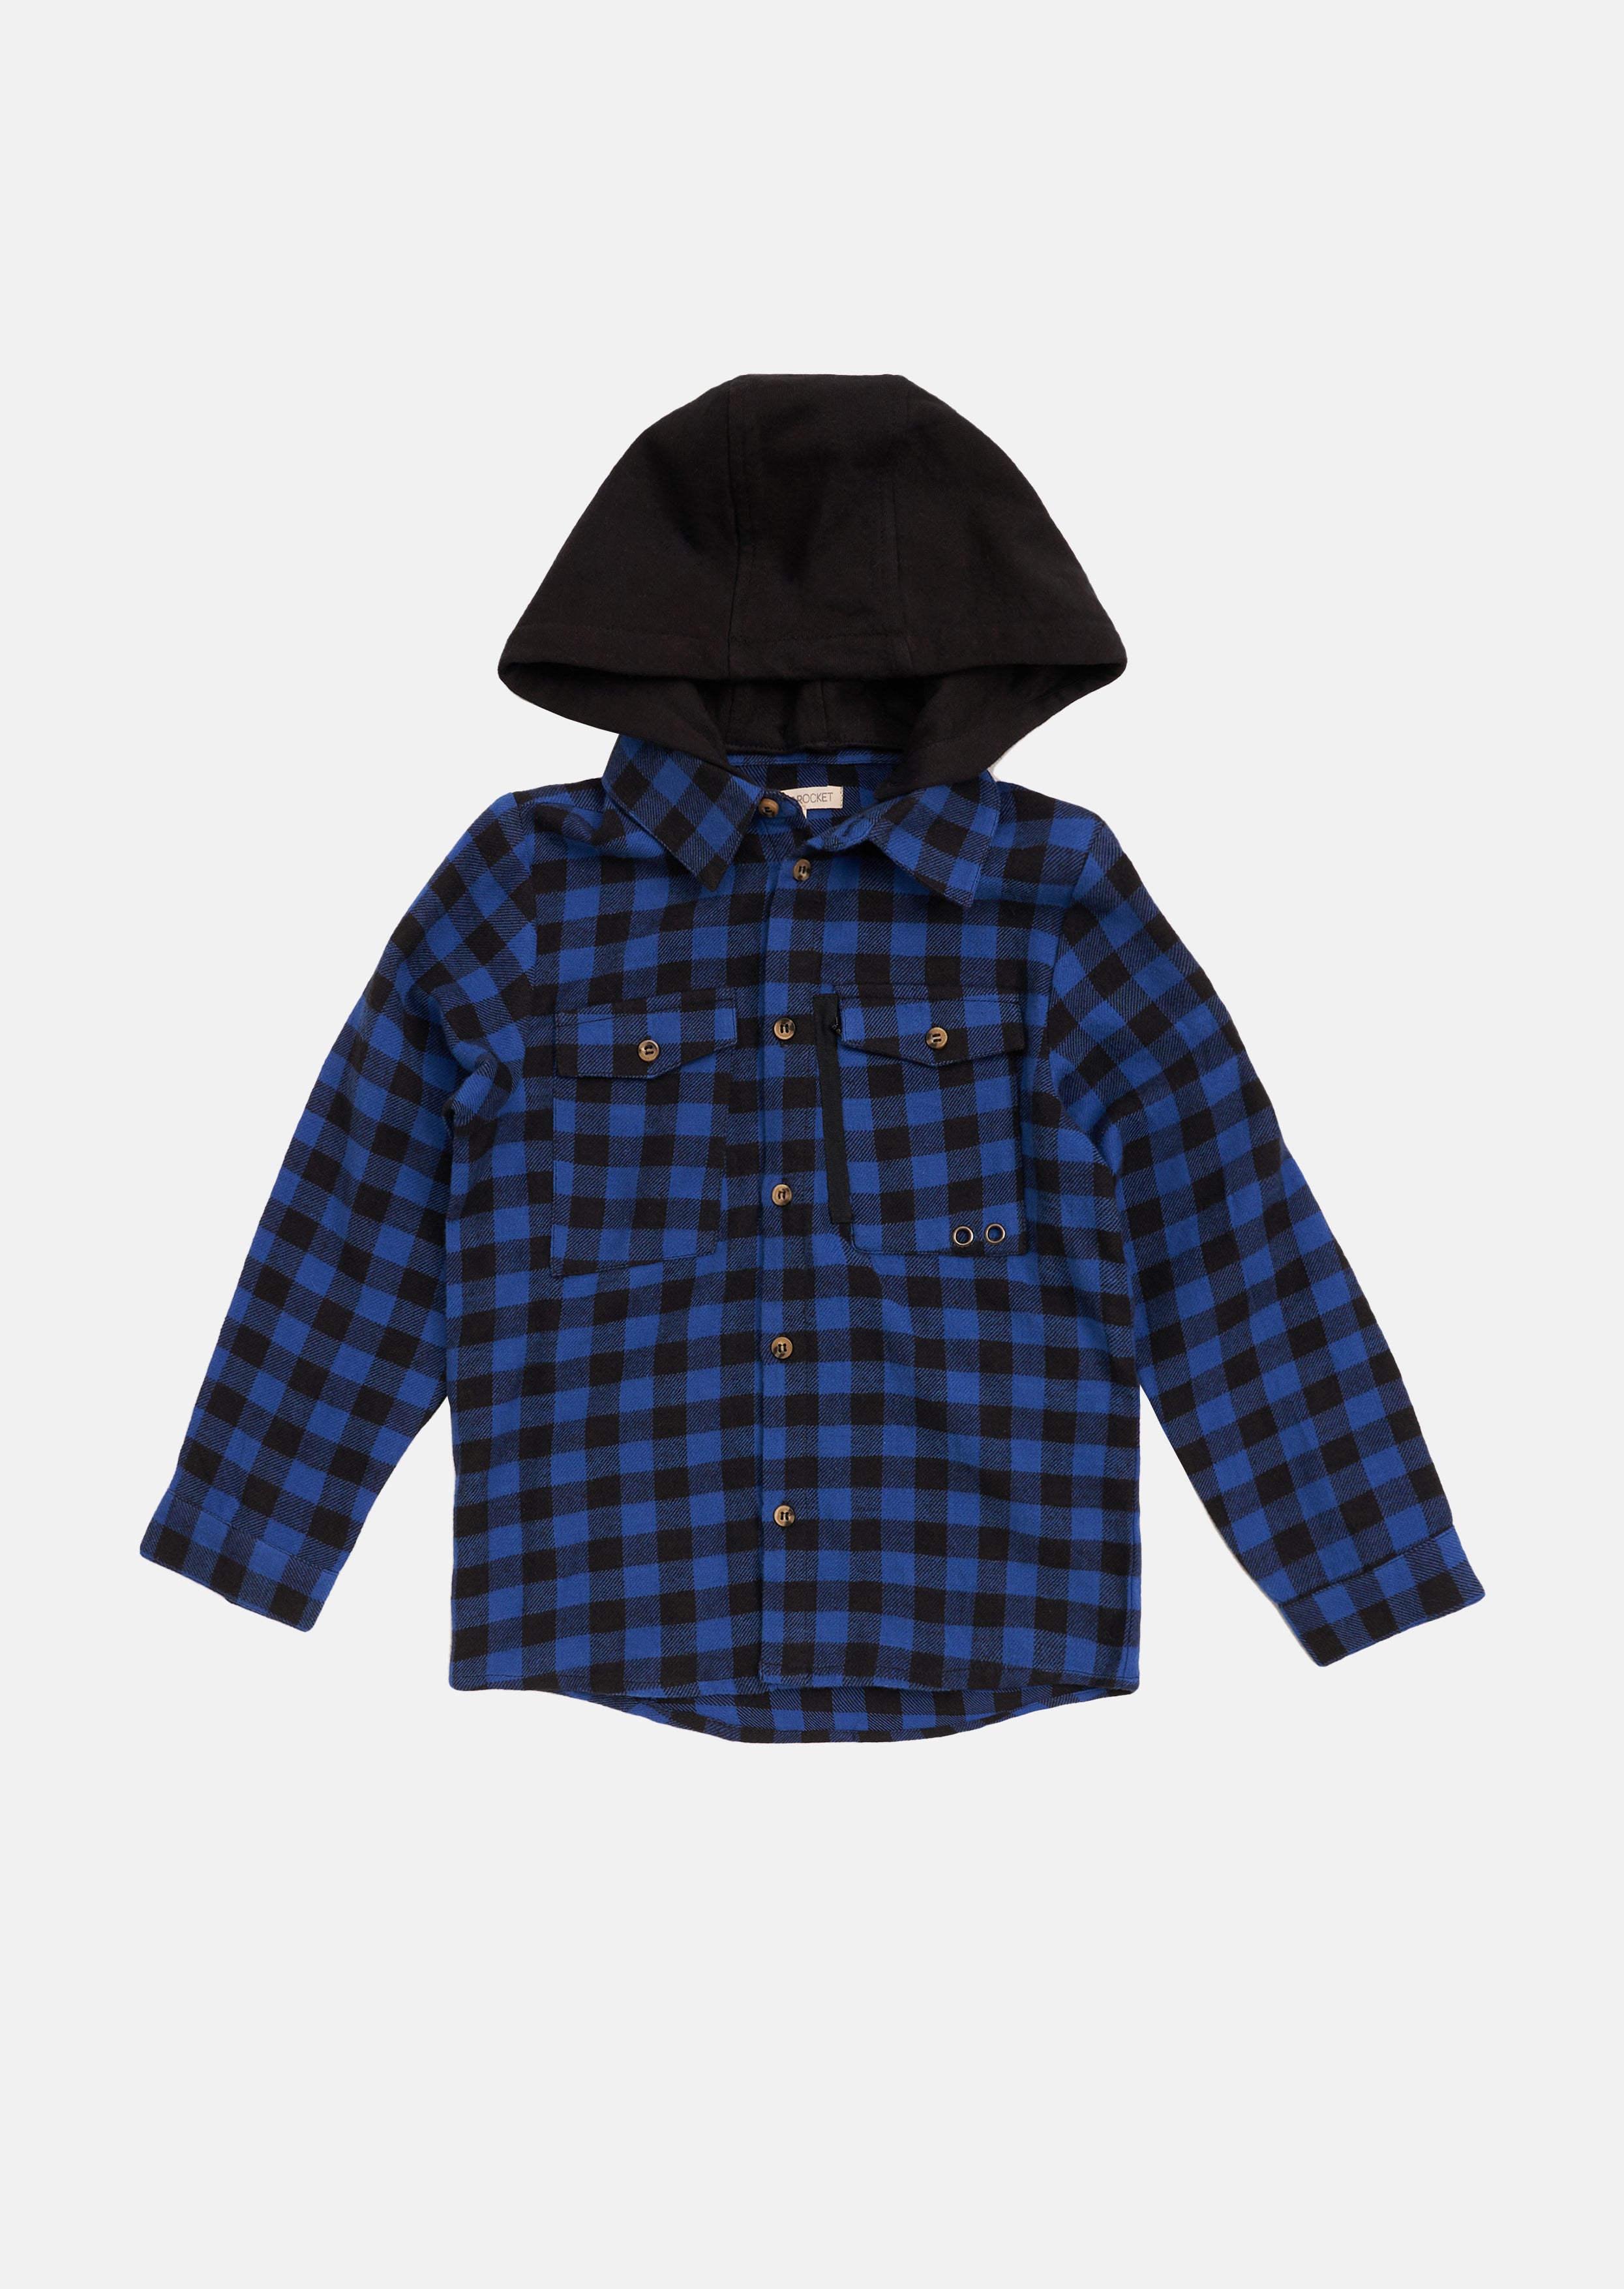 Boys Blue Checked Full Sleeves Shirt with Hooded